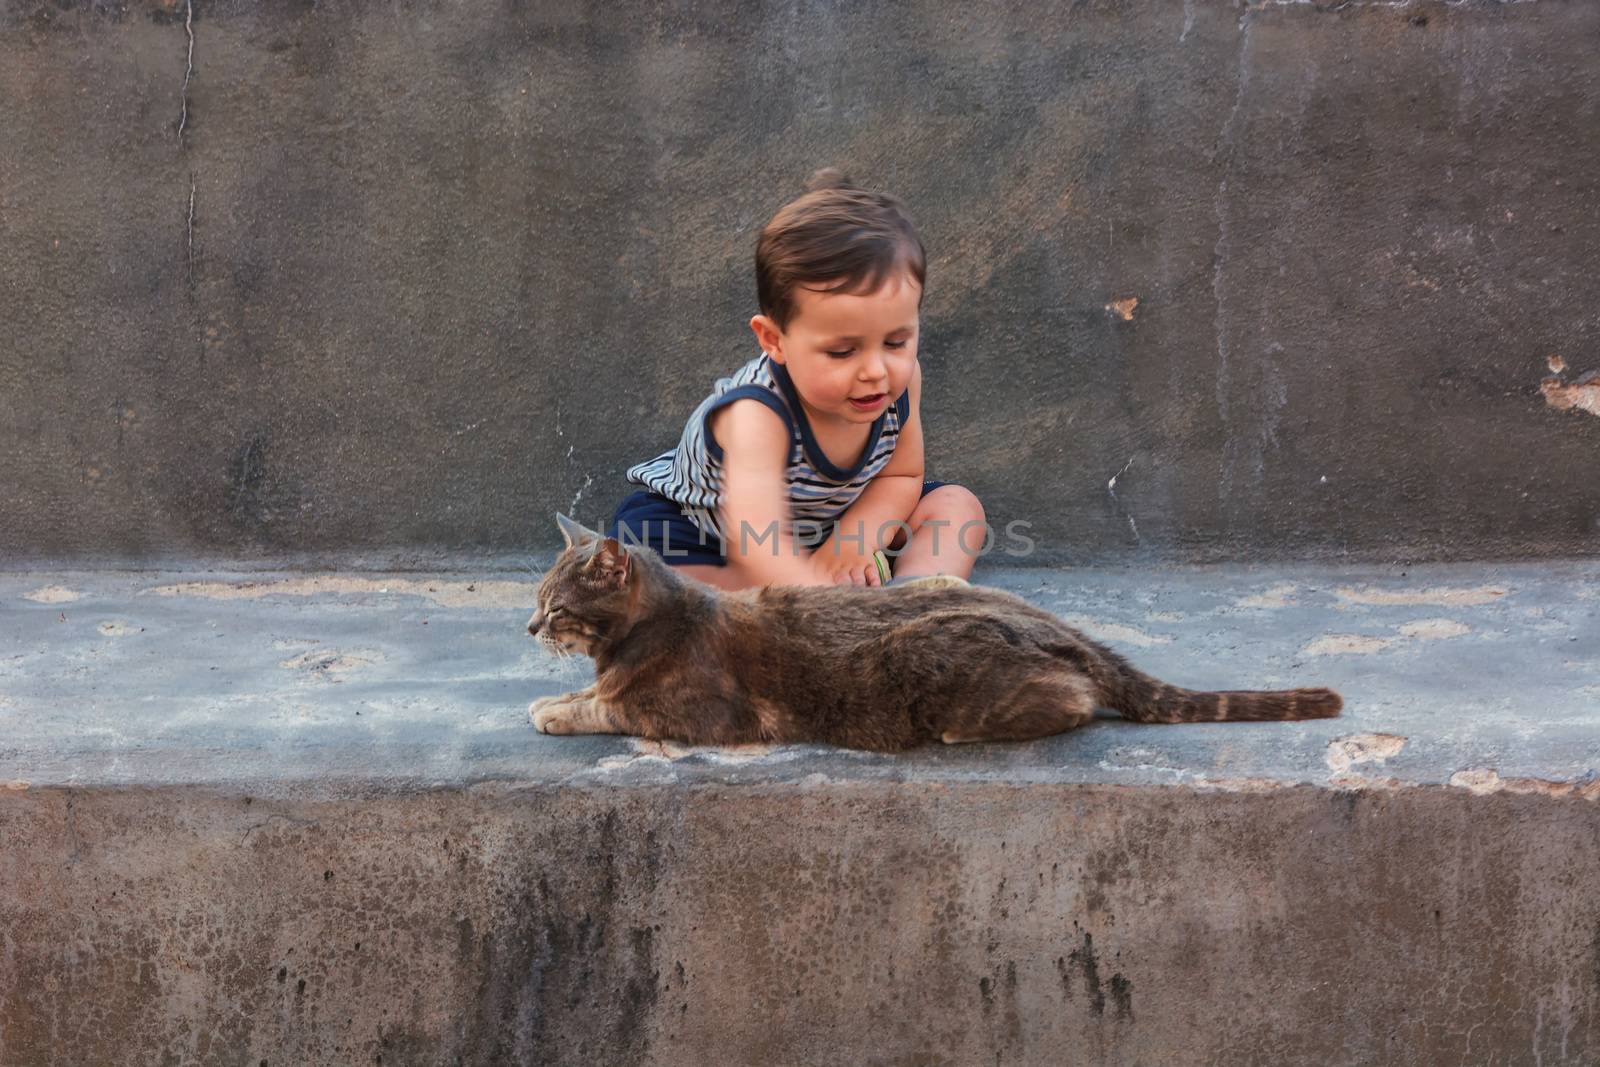 Dear little laughing boy and a cat on a wall.